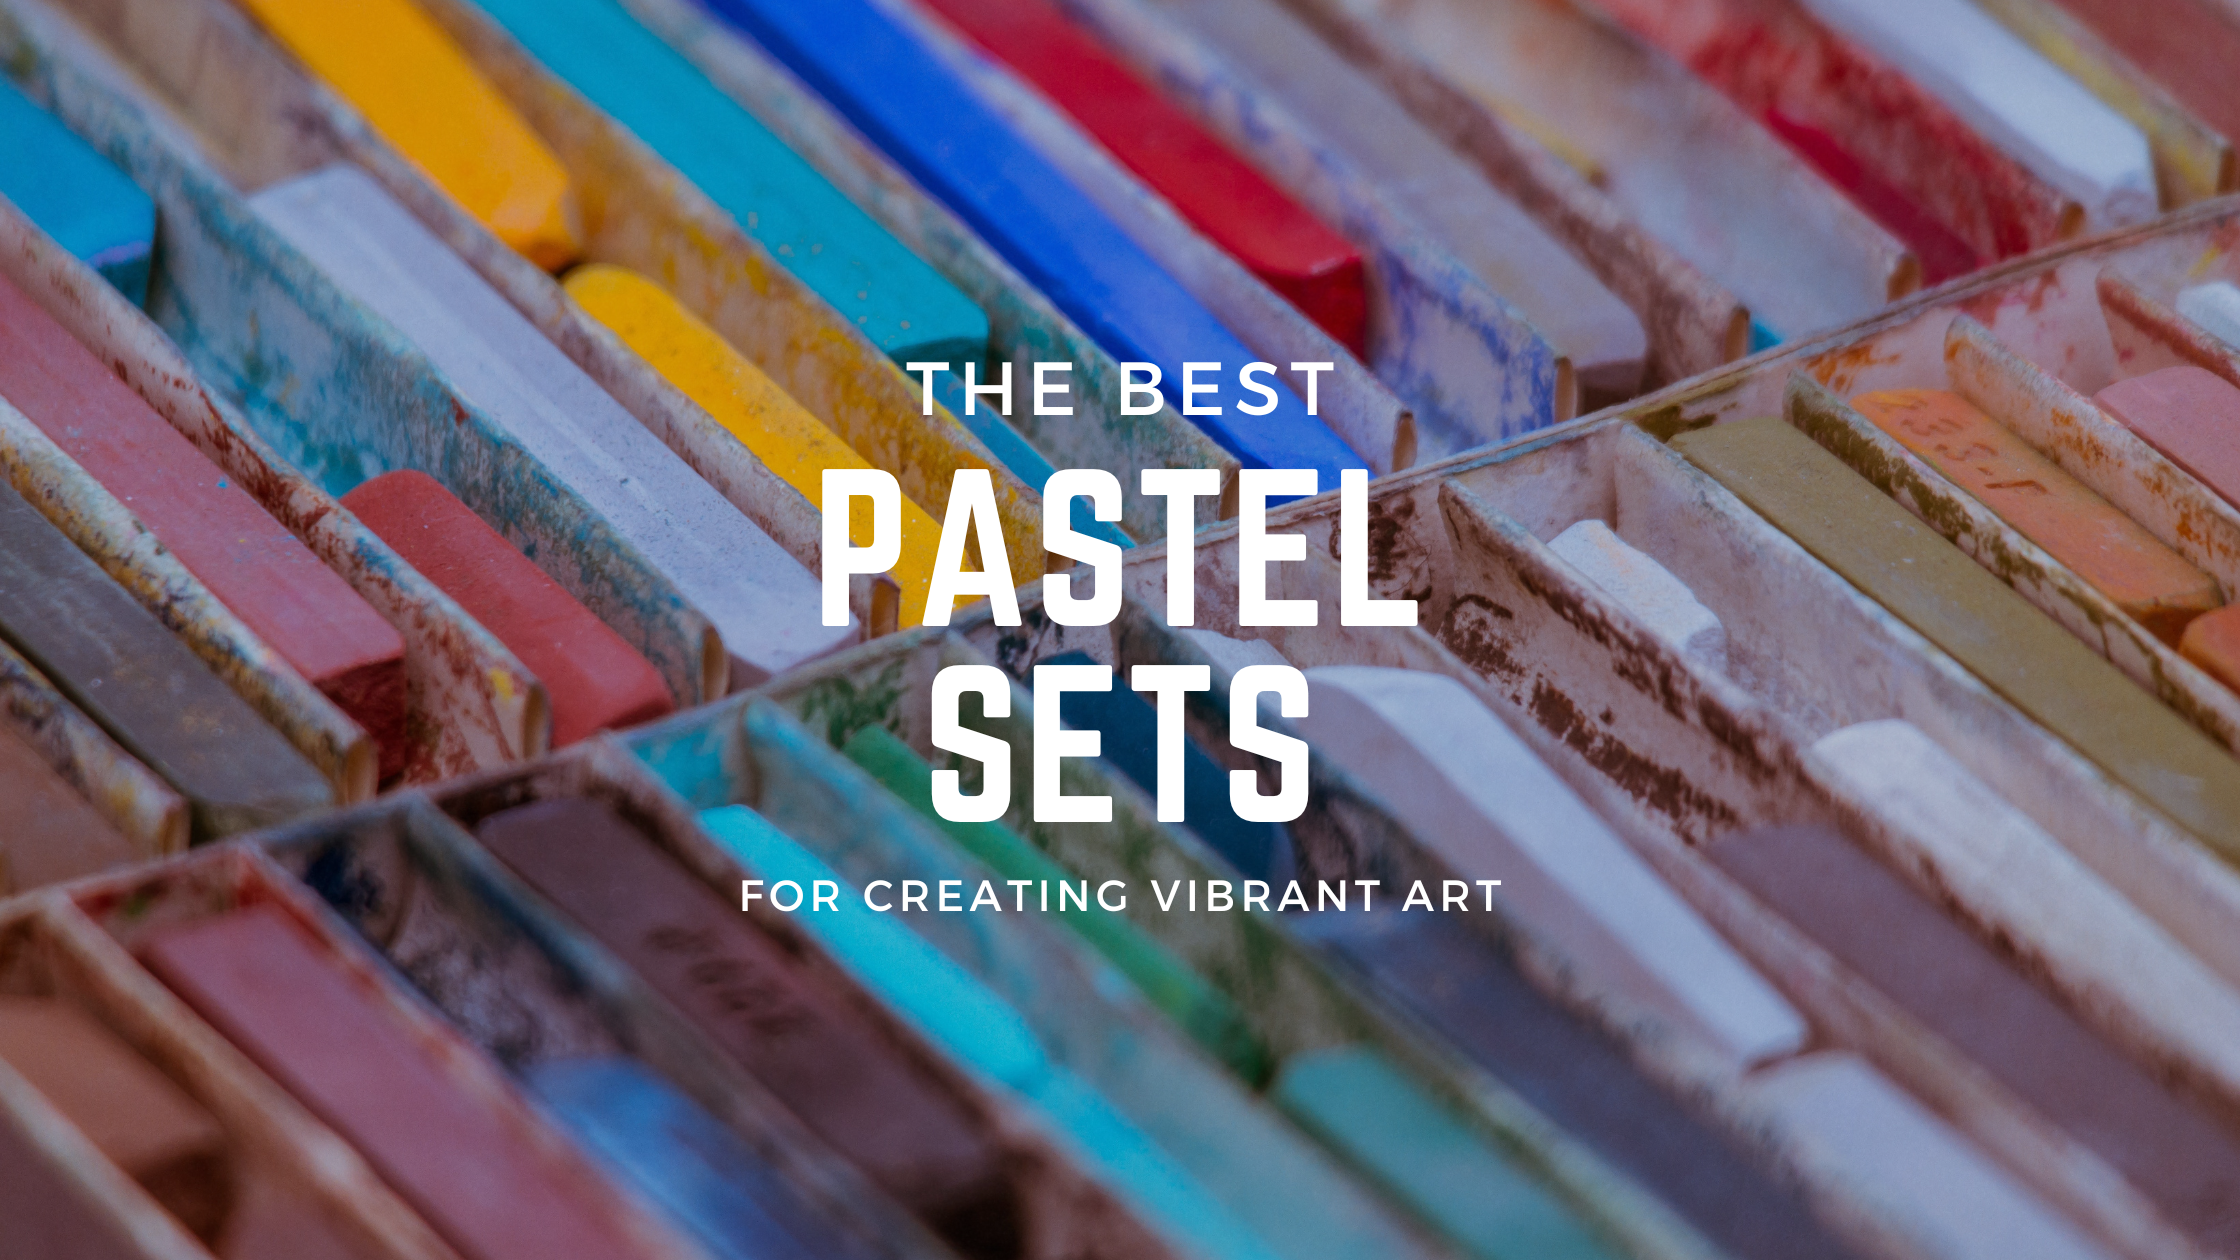 7 Soft Pastel Brands you Might Want to use in your next Art Project